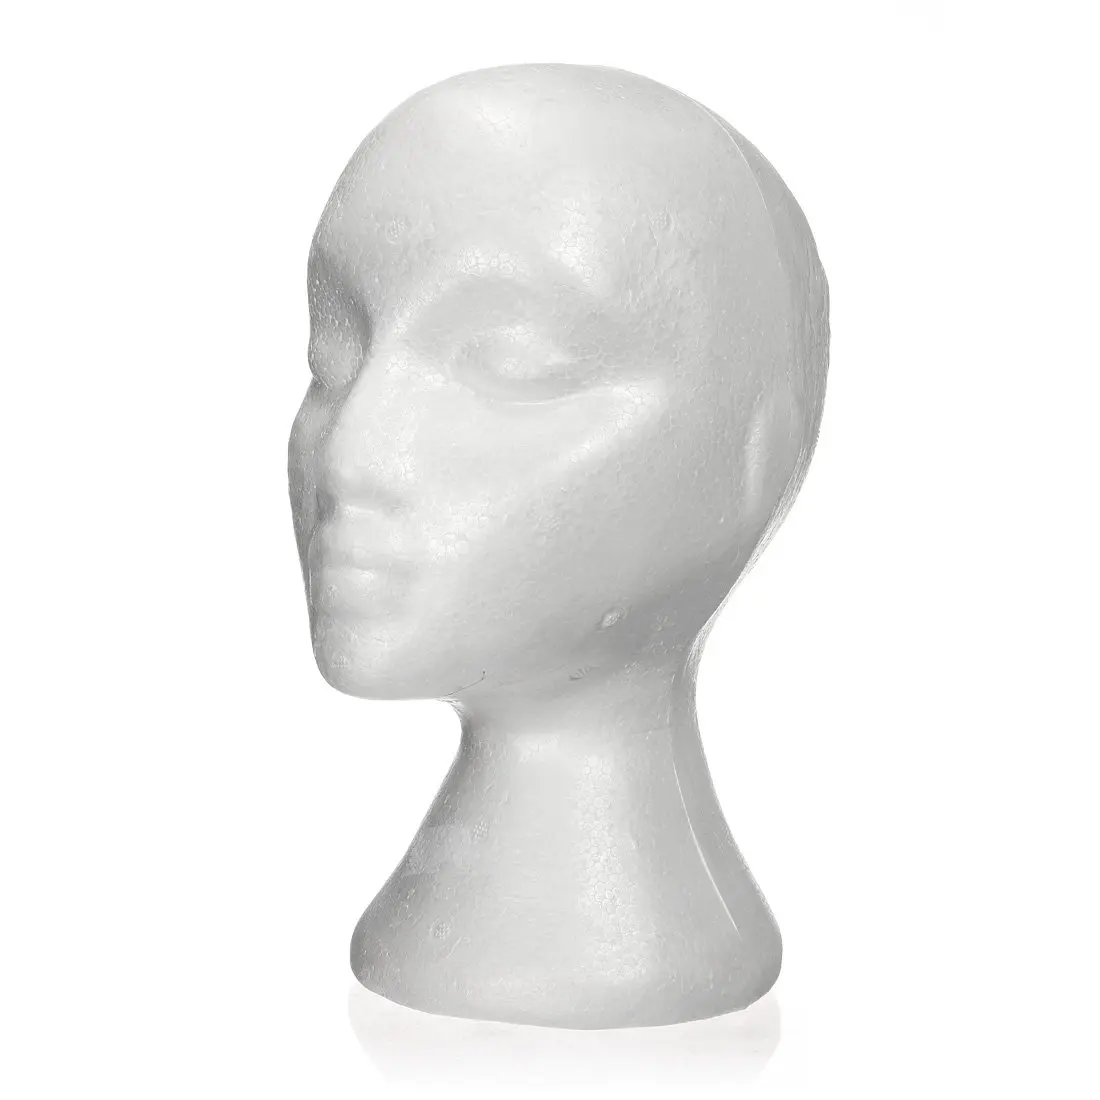 Hot Sale Dummy  Wig Stand  Wig Head  Mannequin Head Female Foam Polystyrene Exhibitor For Cap Headphones Hair Accessories